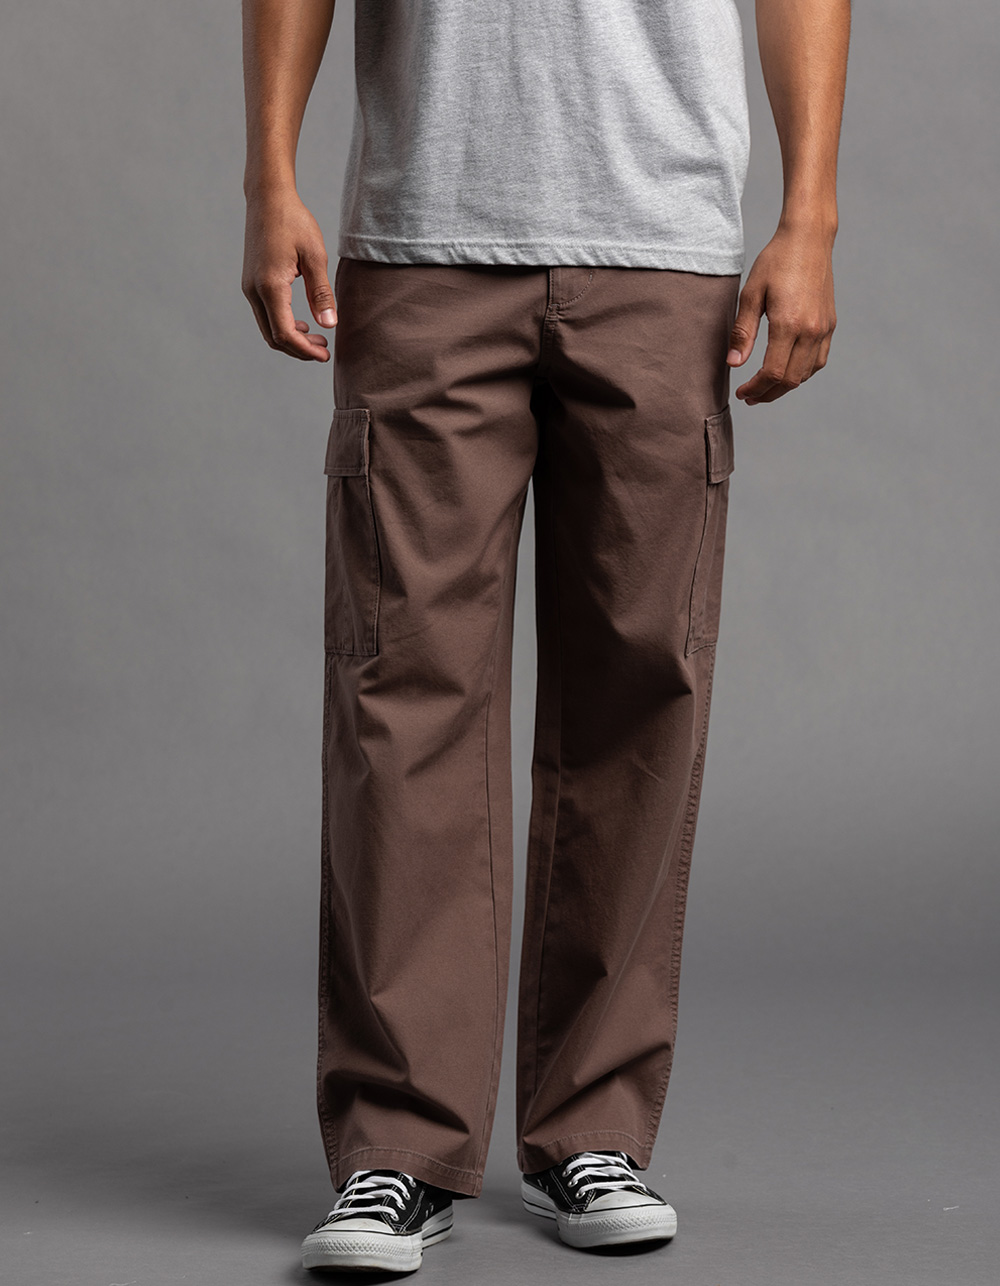 RSQ Mens Loose Cargo Ripstop Pants